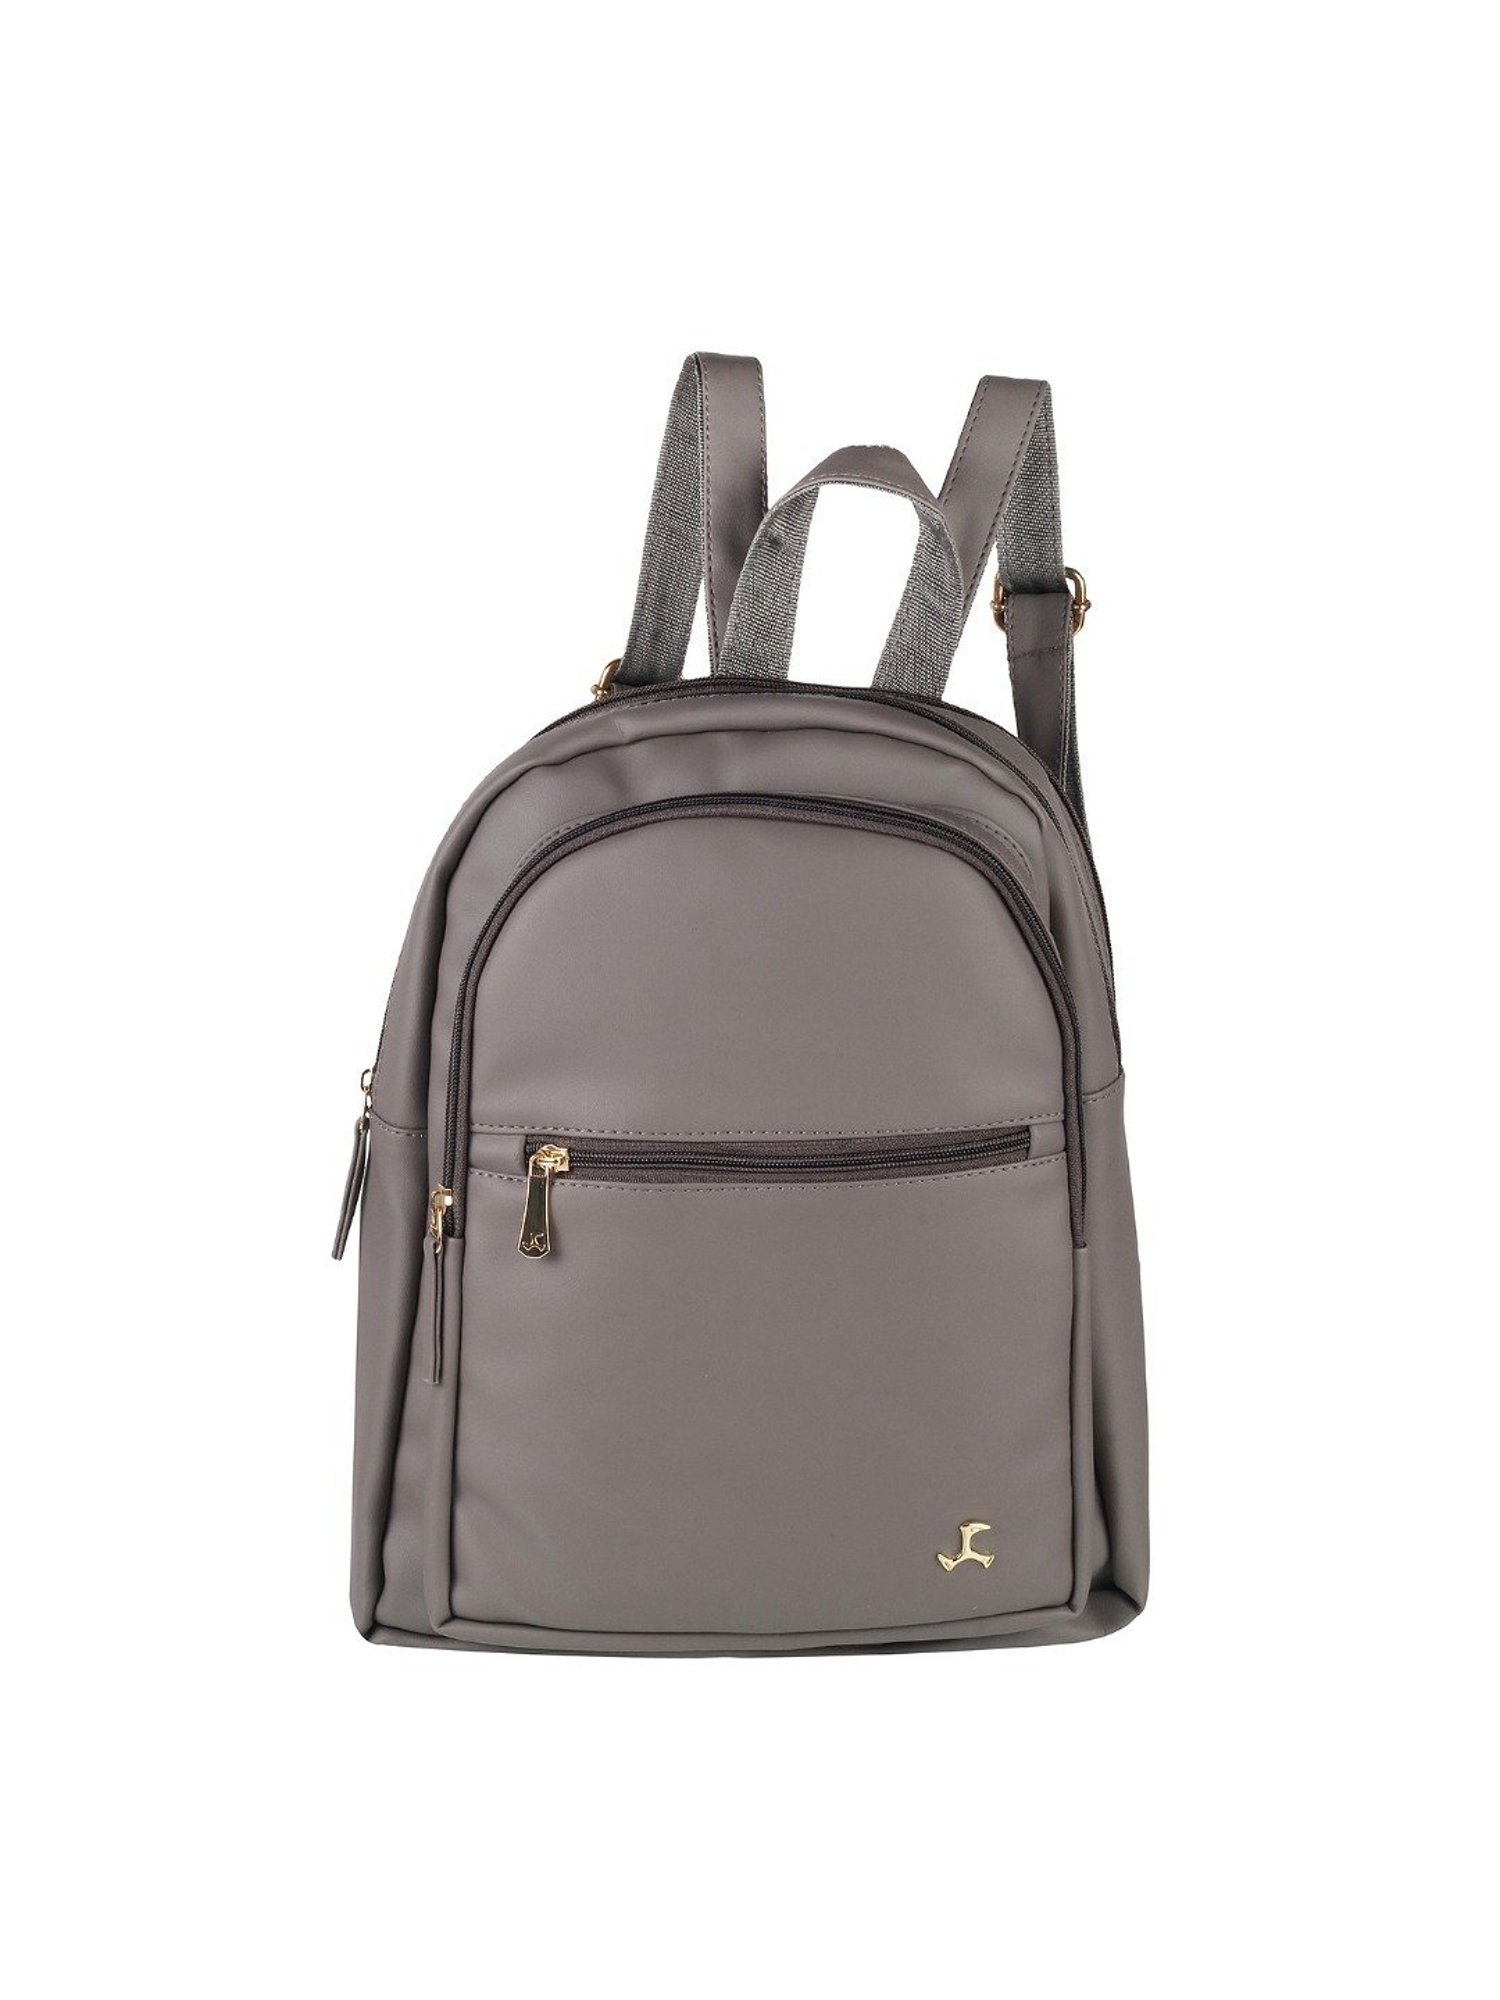 The Philos Grey Leather Backpack For Men & Women - The Jacket Maker